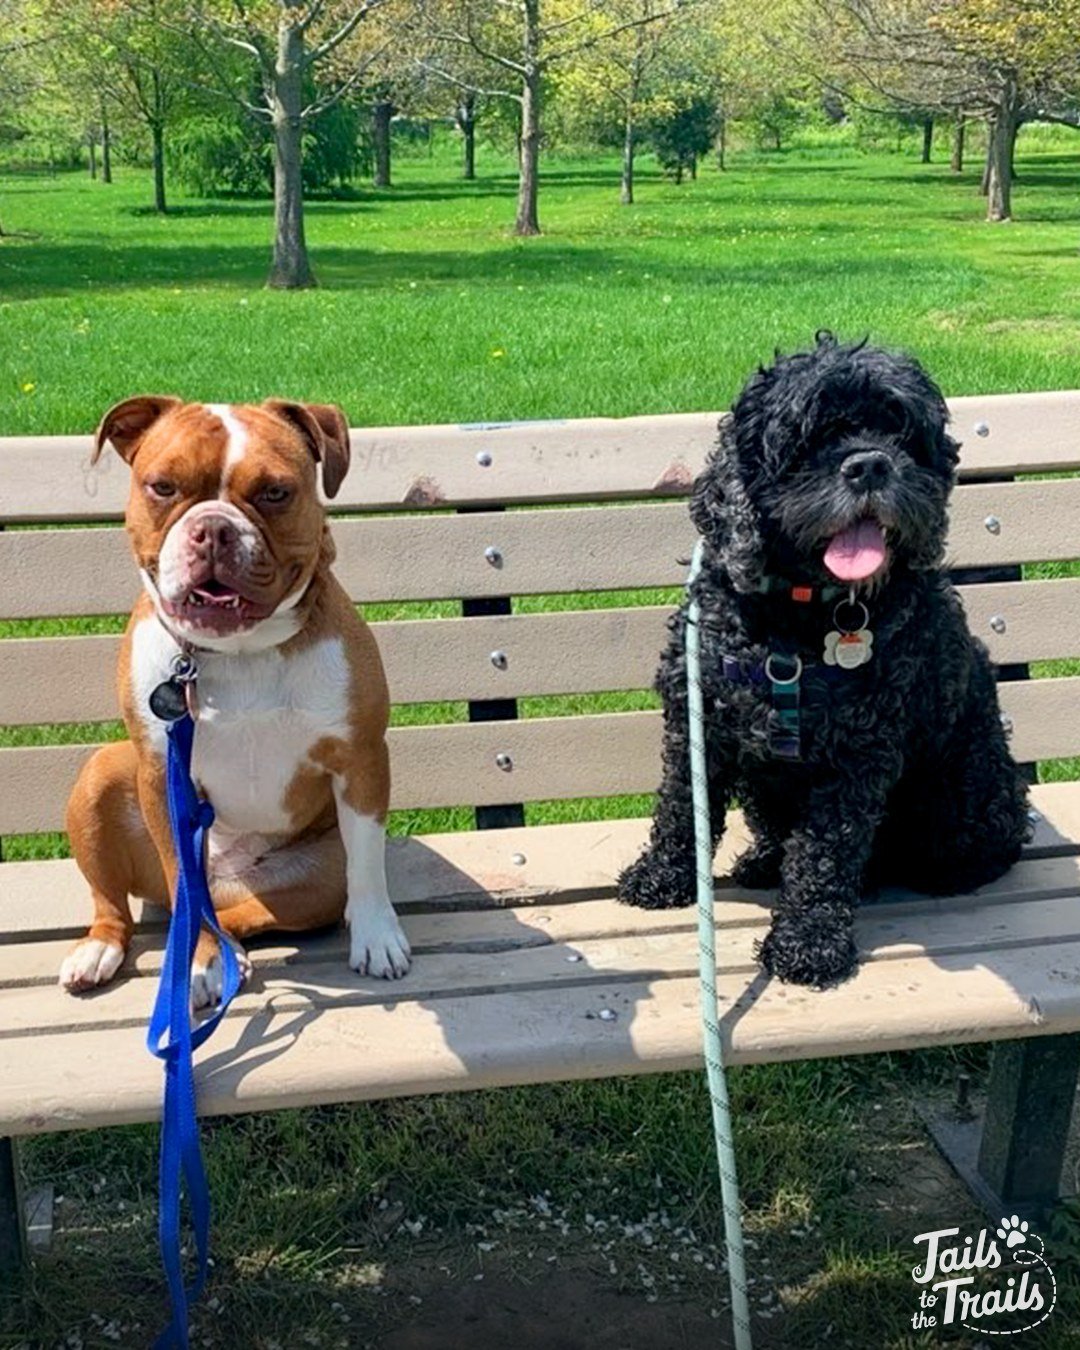 Eddie and Teddy 💚 

These two pals love hanging out and exploring together.
.
.
.
.
.
#tailstothetrailsinc #dogwalkers #claringtonontario #claringtonsmallbusiness #americancockerspaniel #cockerspaniel #cockerspaniels #cockerspaniellove #boxerdog #bu